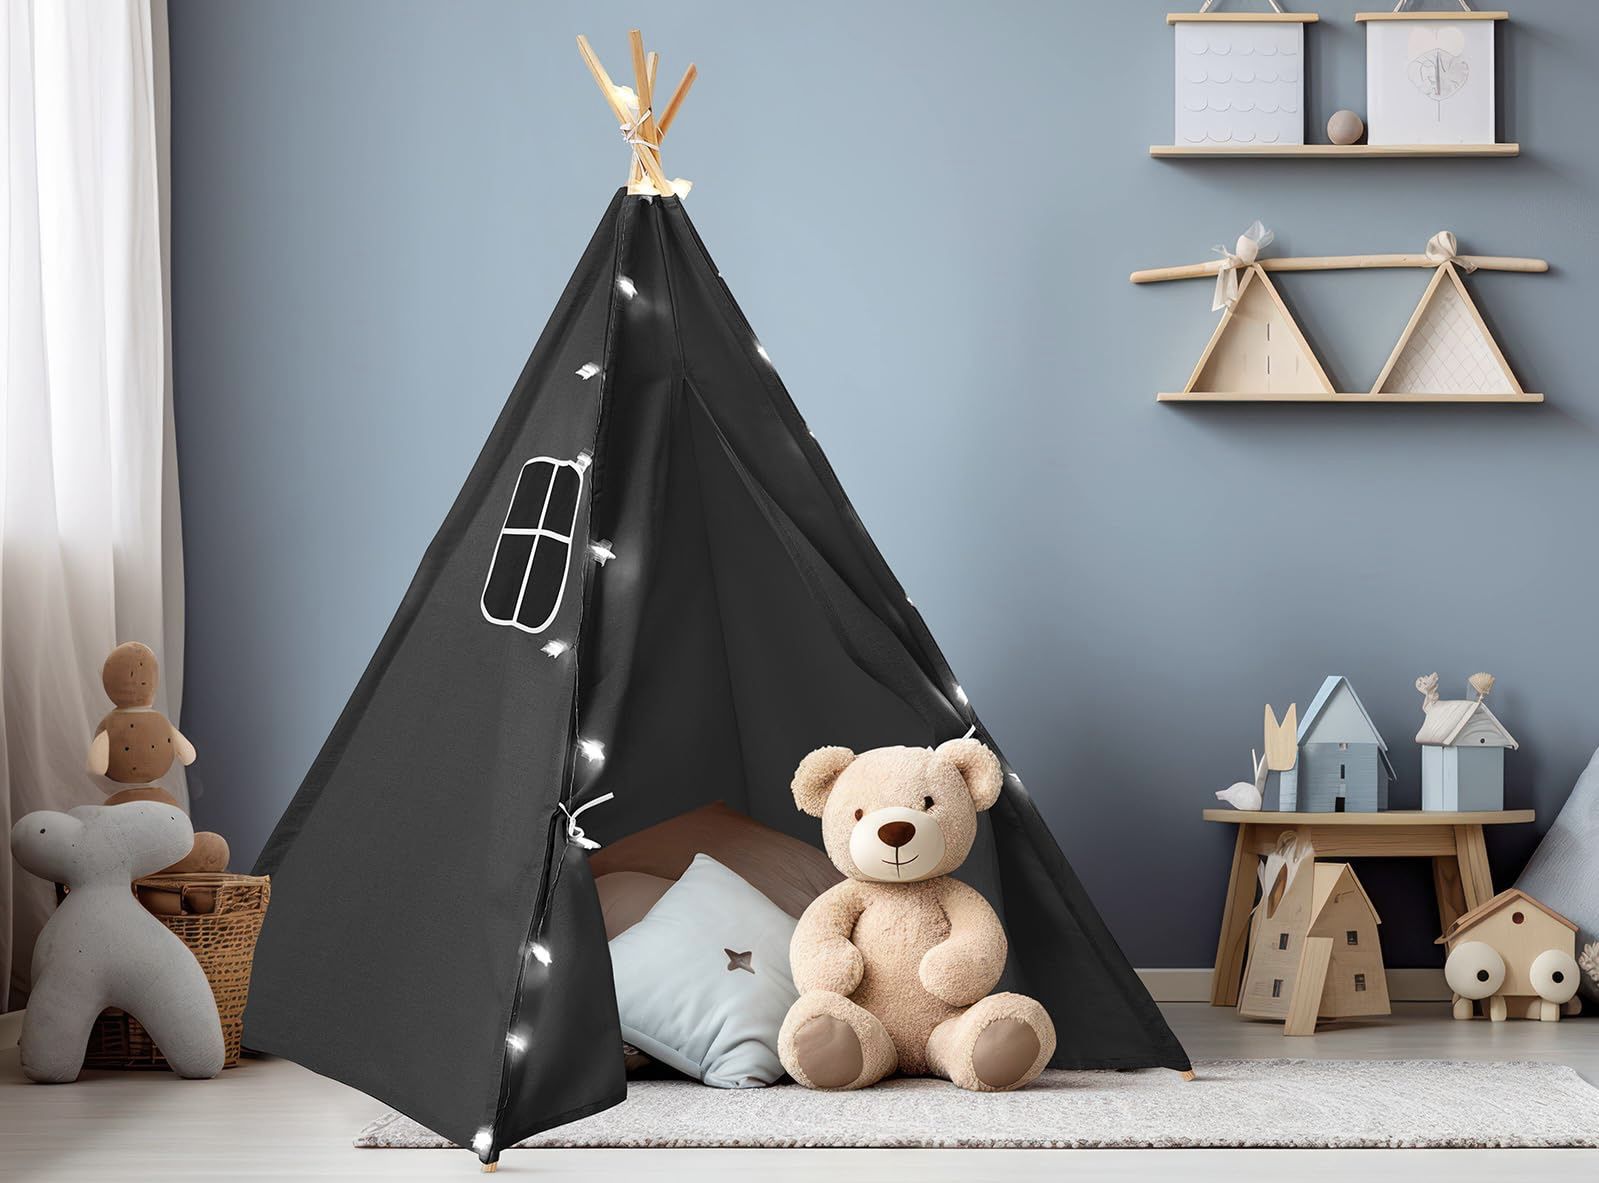 New Kids 3 Pack Slumber Party Movie Night Teepee Tents w/ Lights